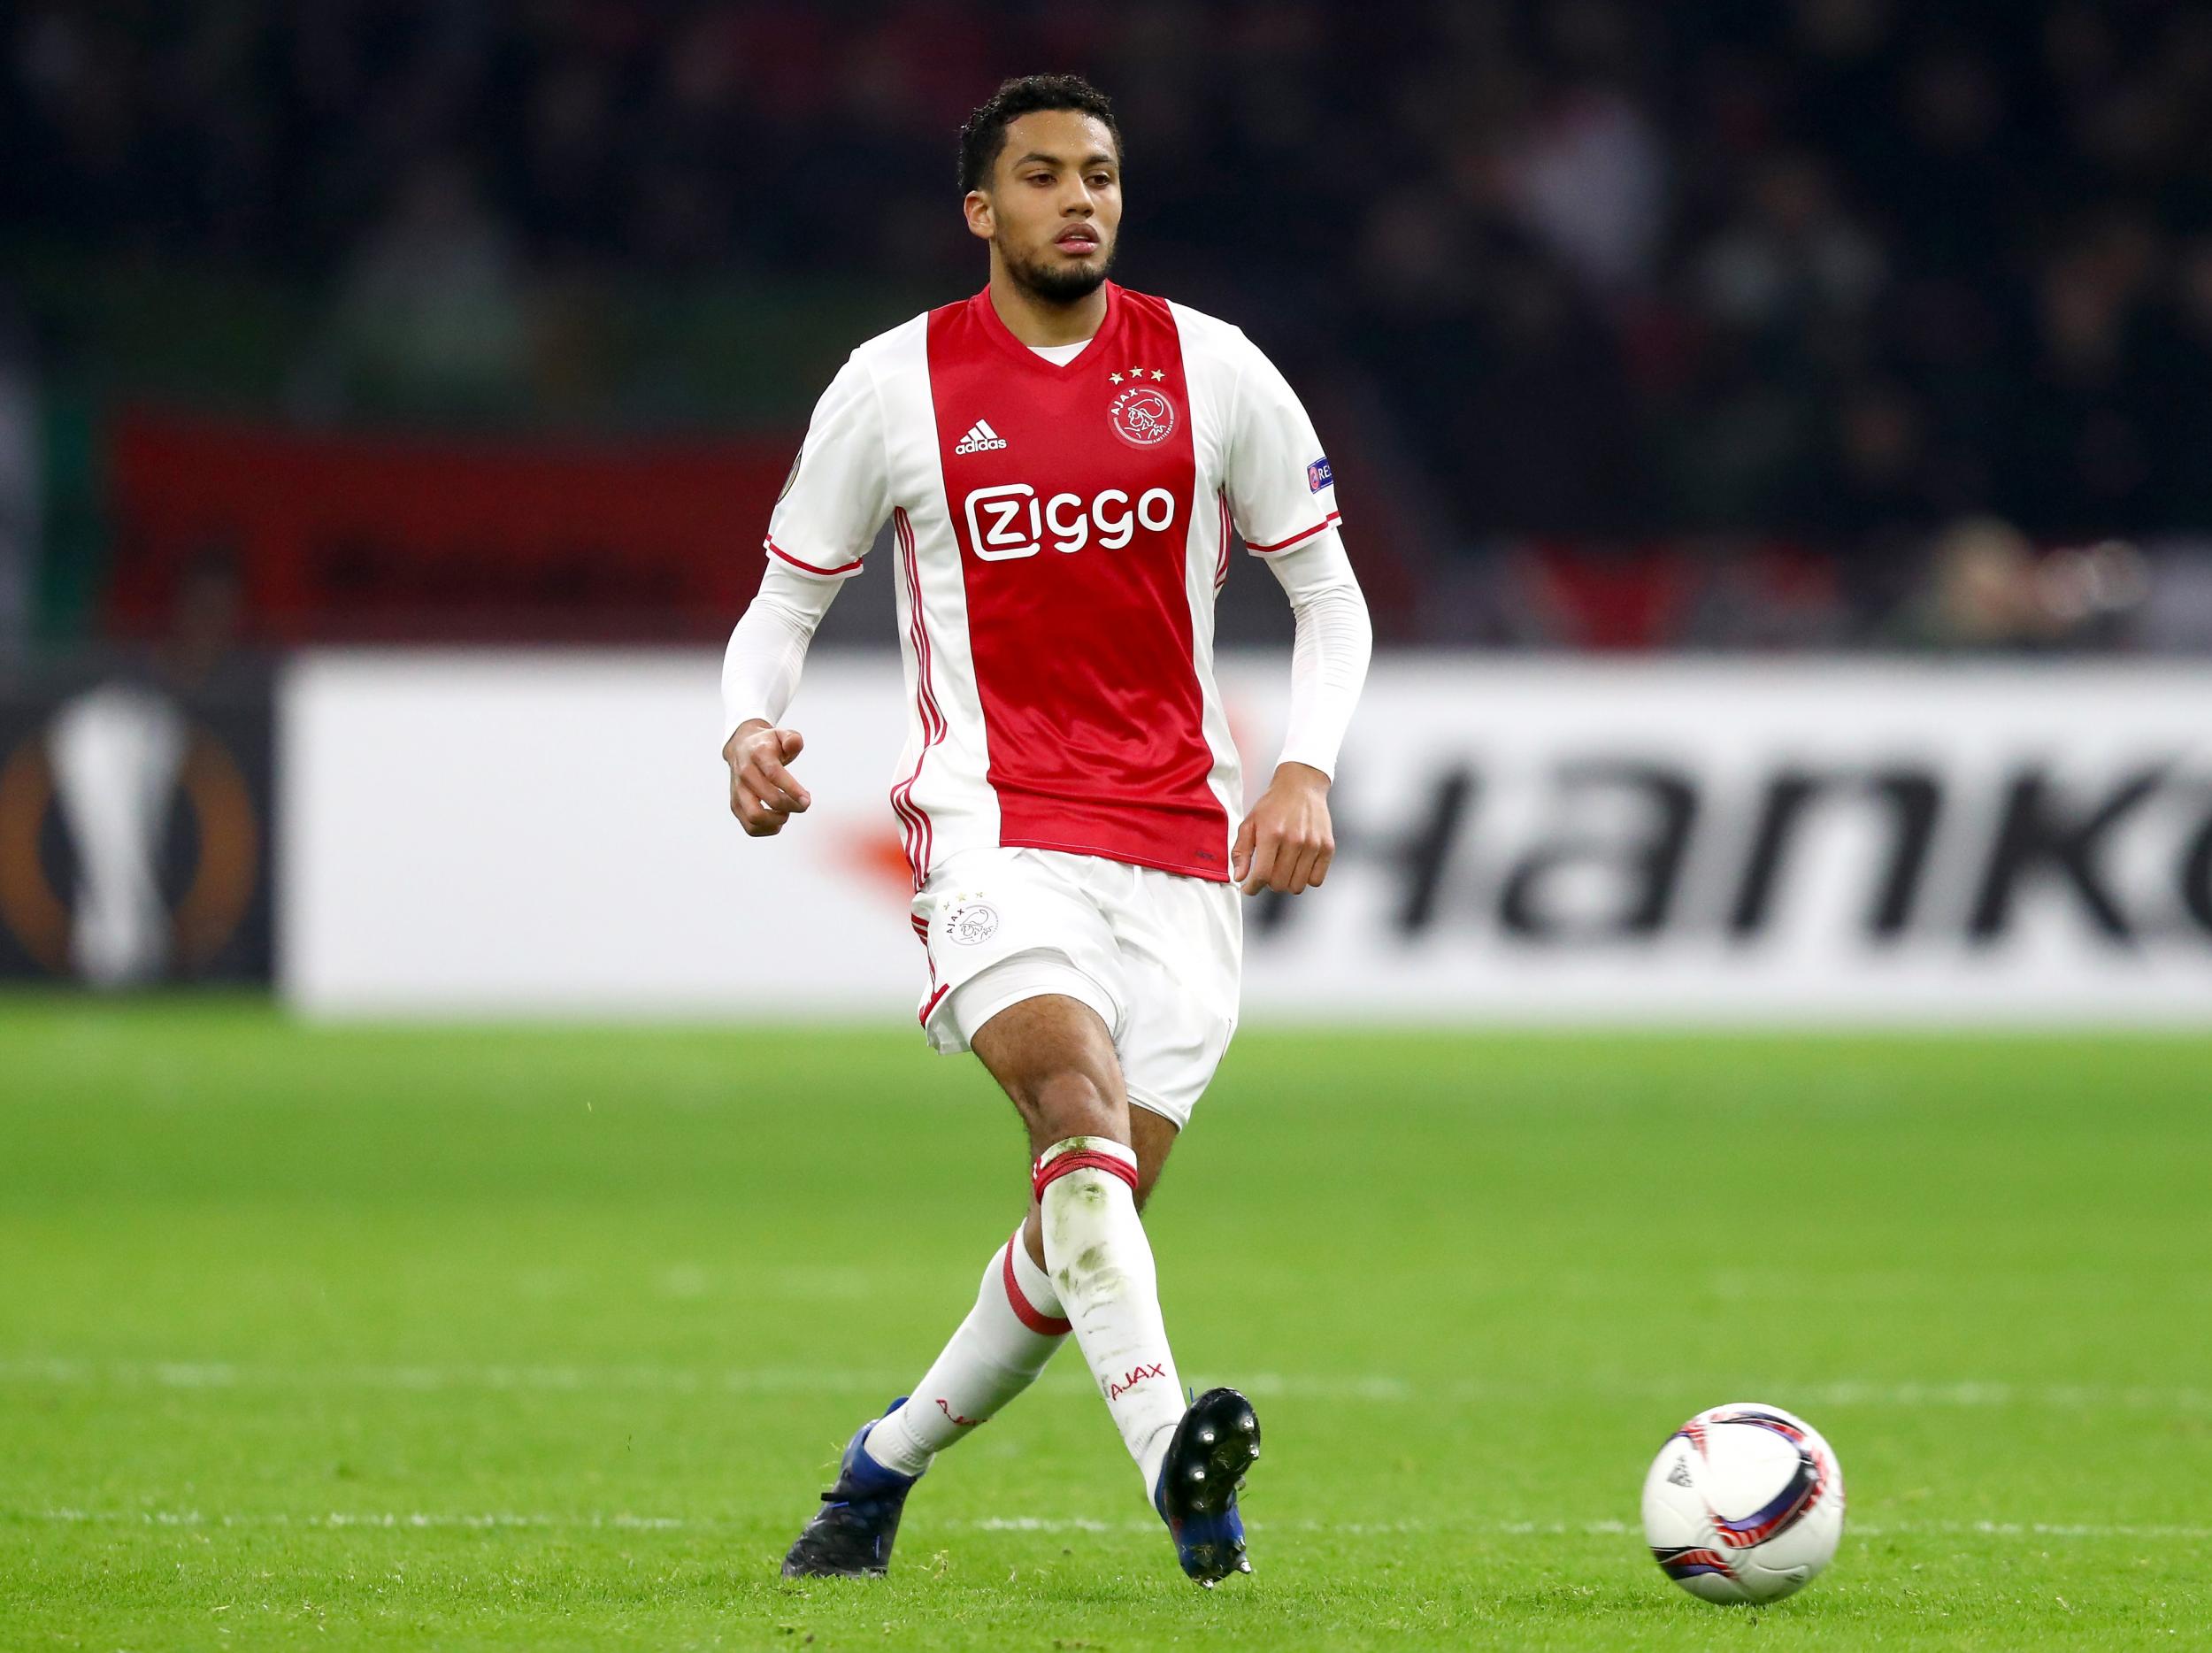 Riedewald is a highly-rated young defender